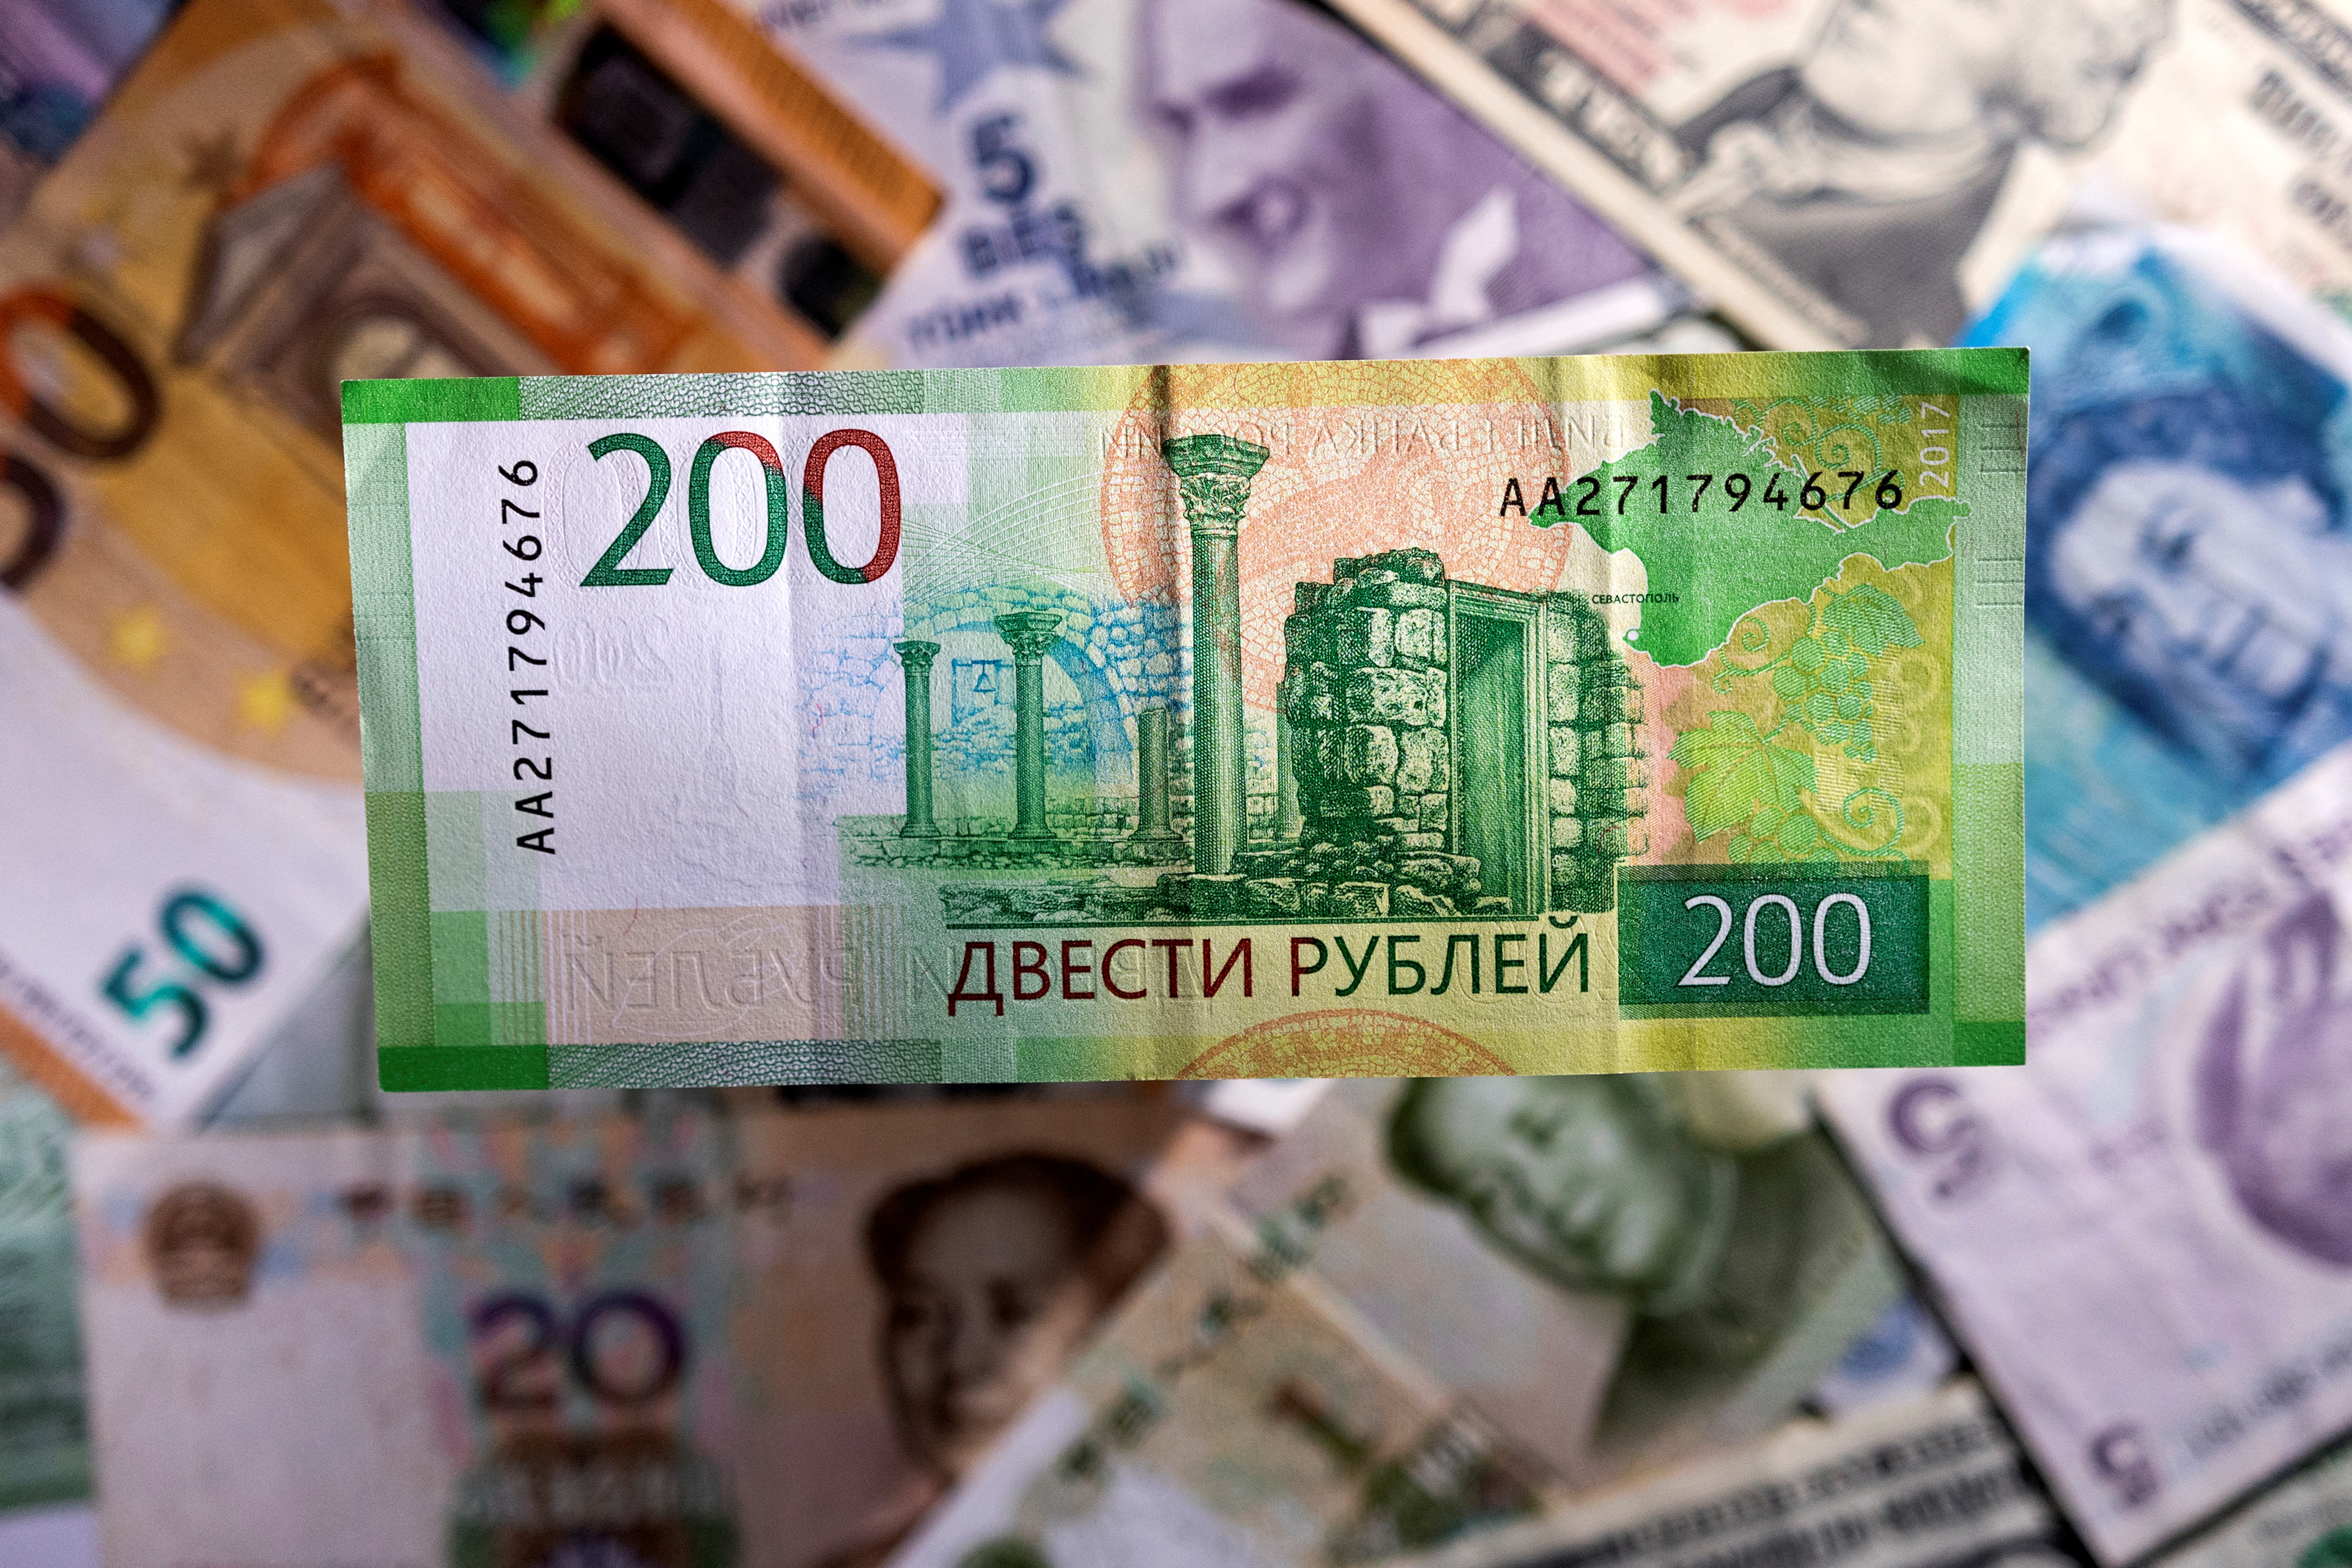 Illustration shows a Russian rouble banknote